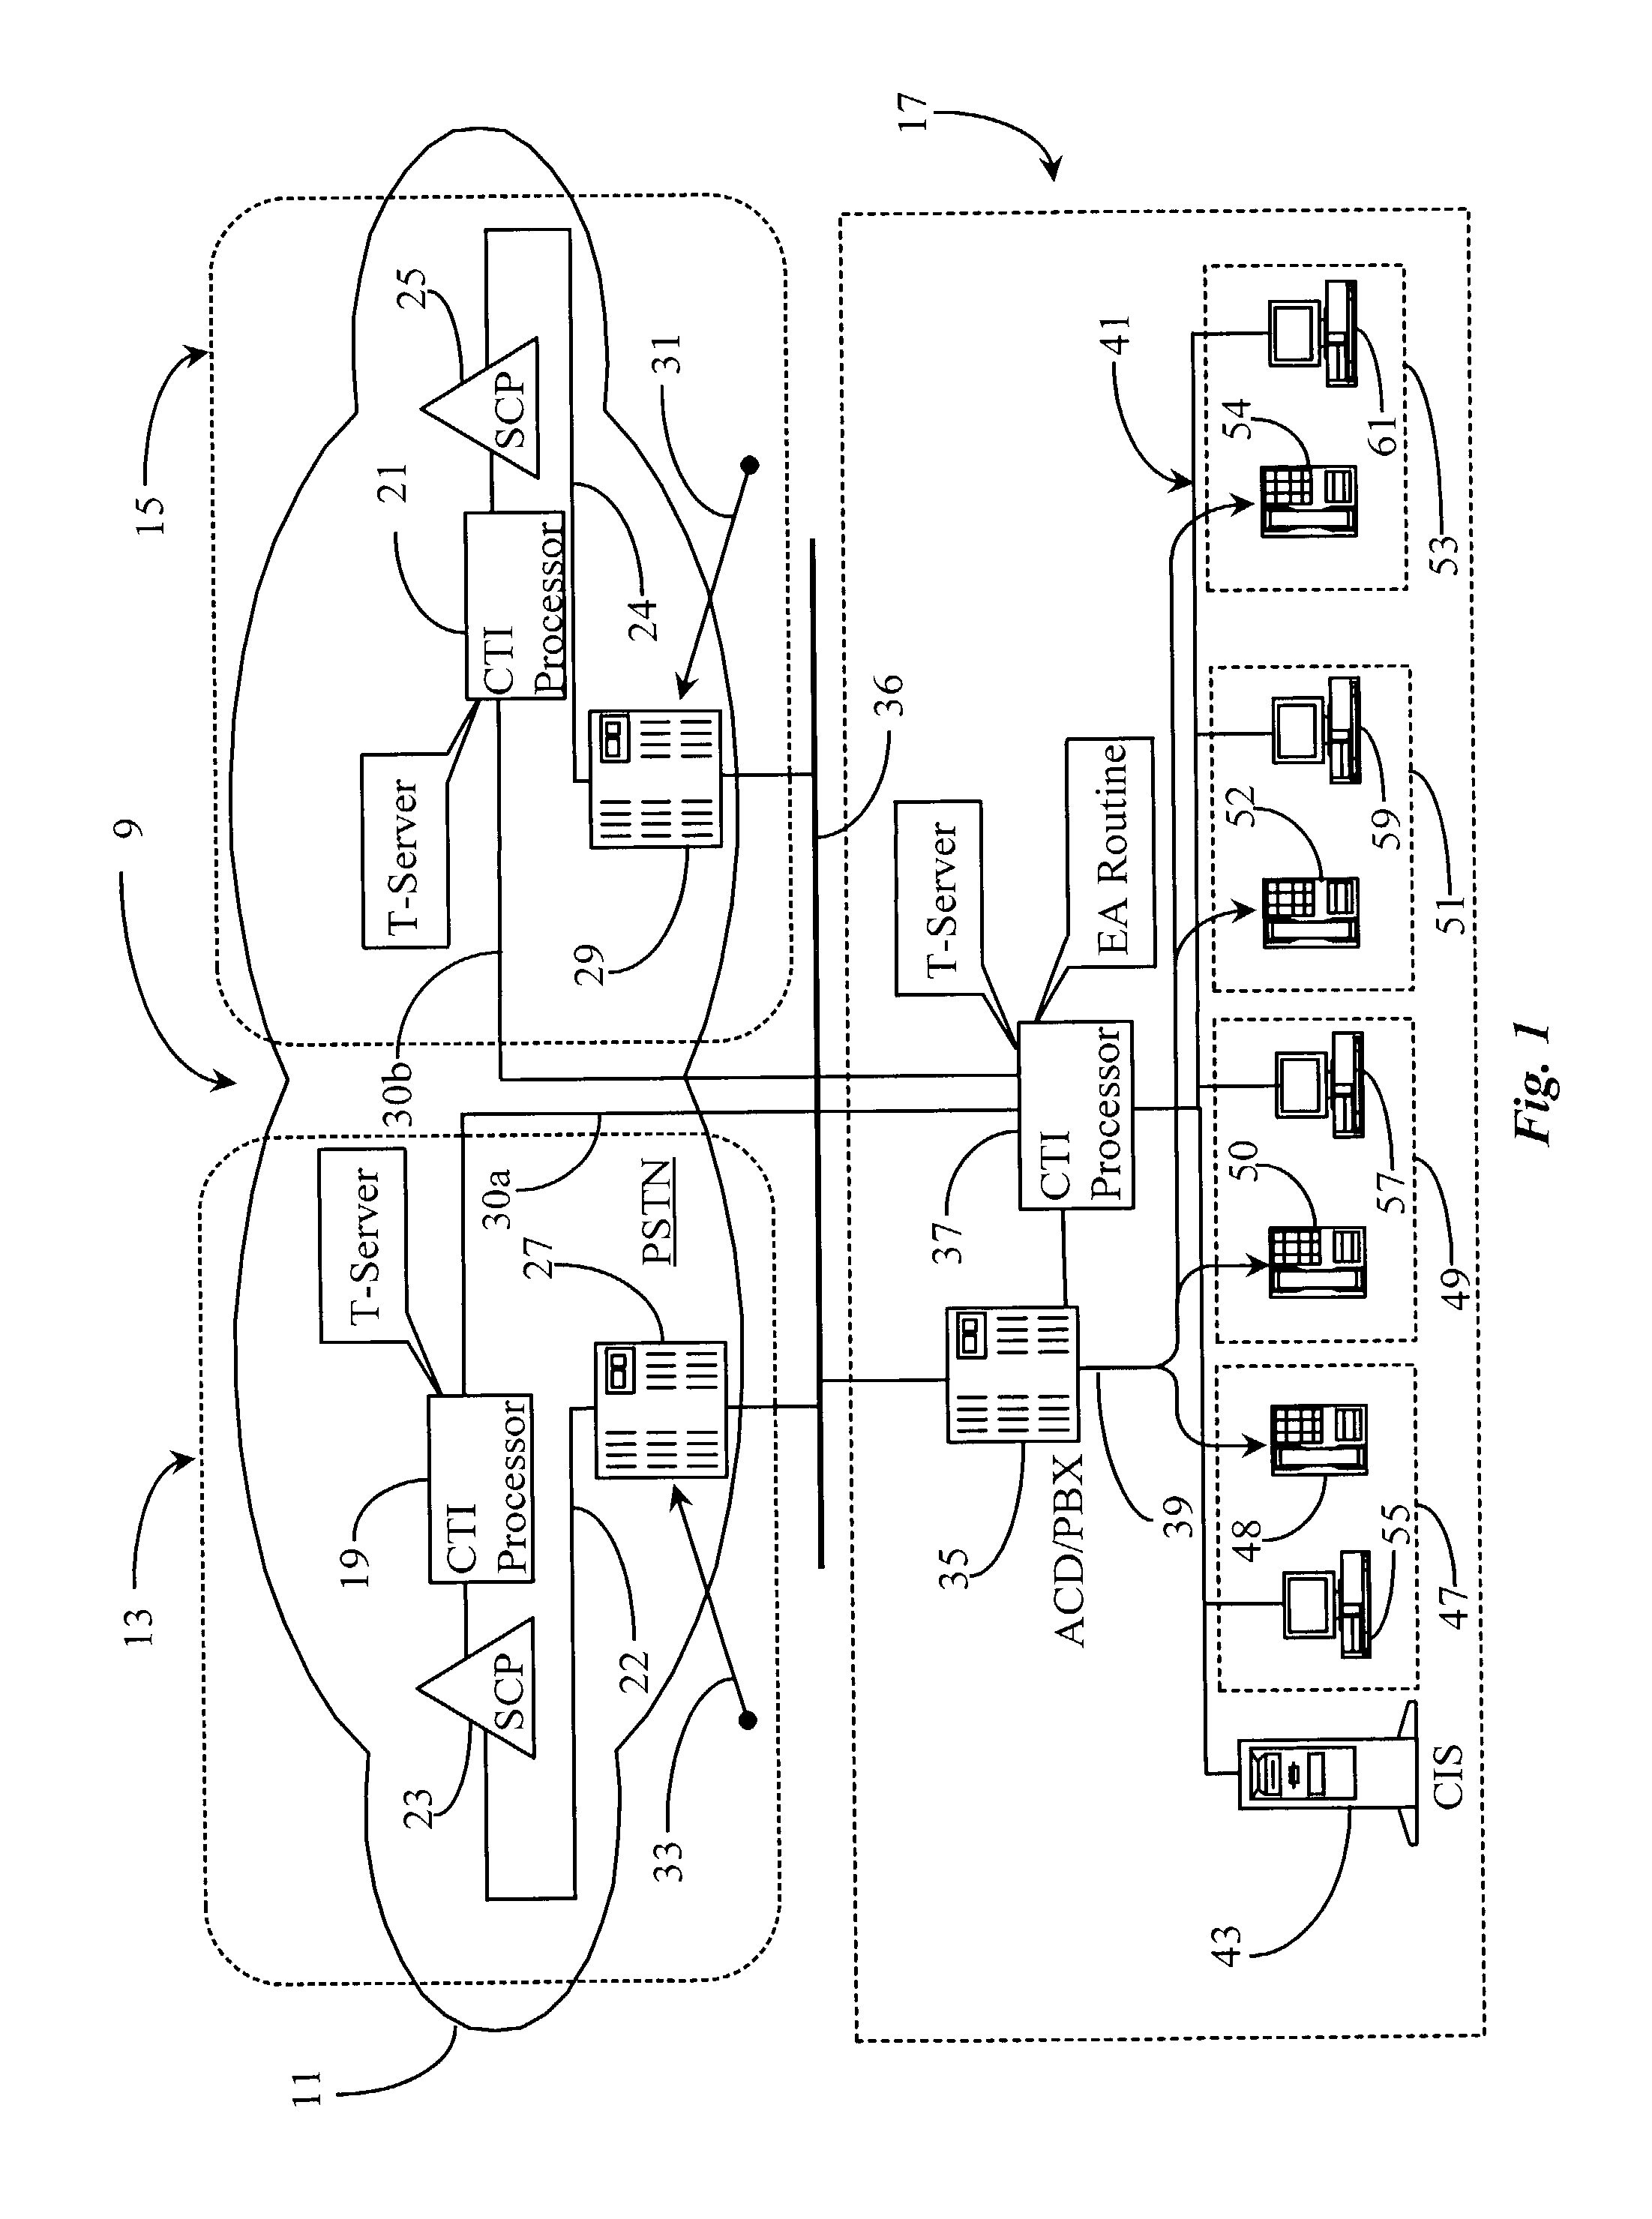 Method and apparatus for providing fair access to agents in a communication center